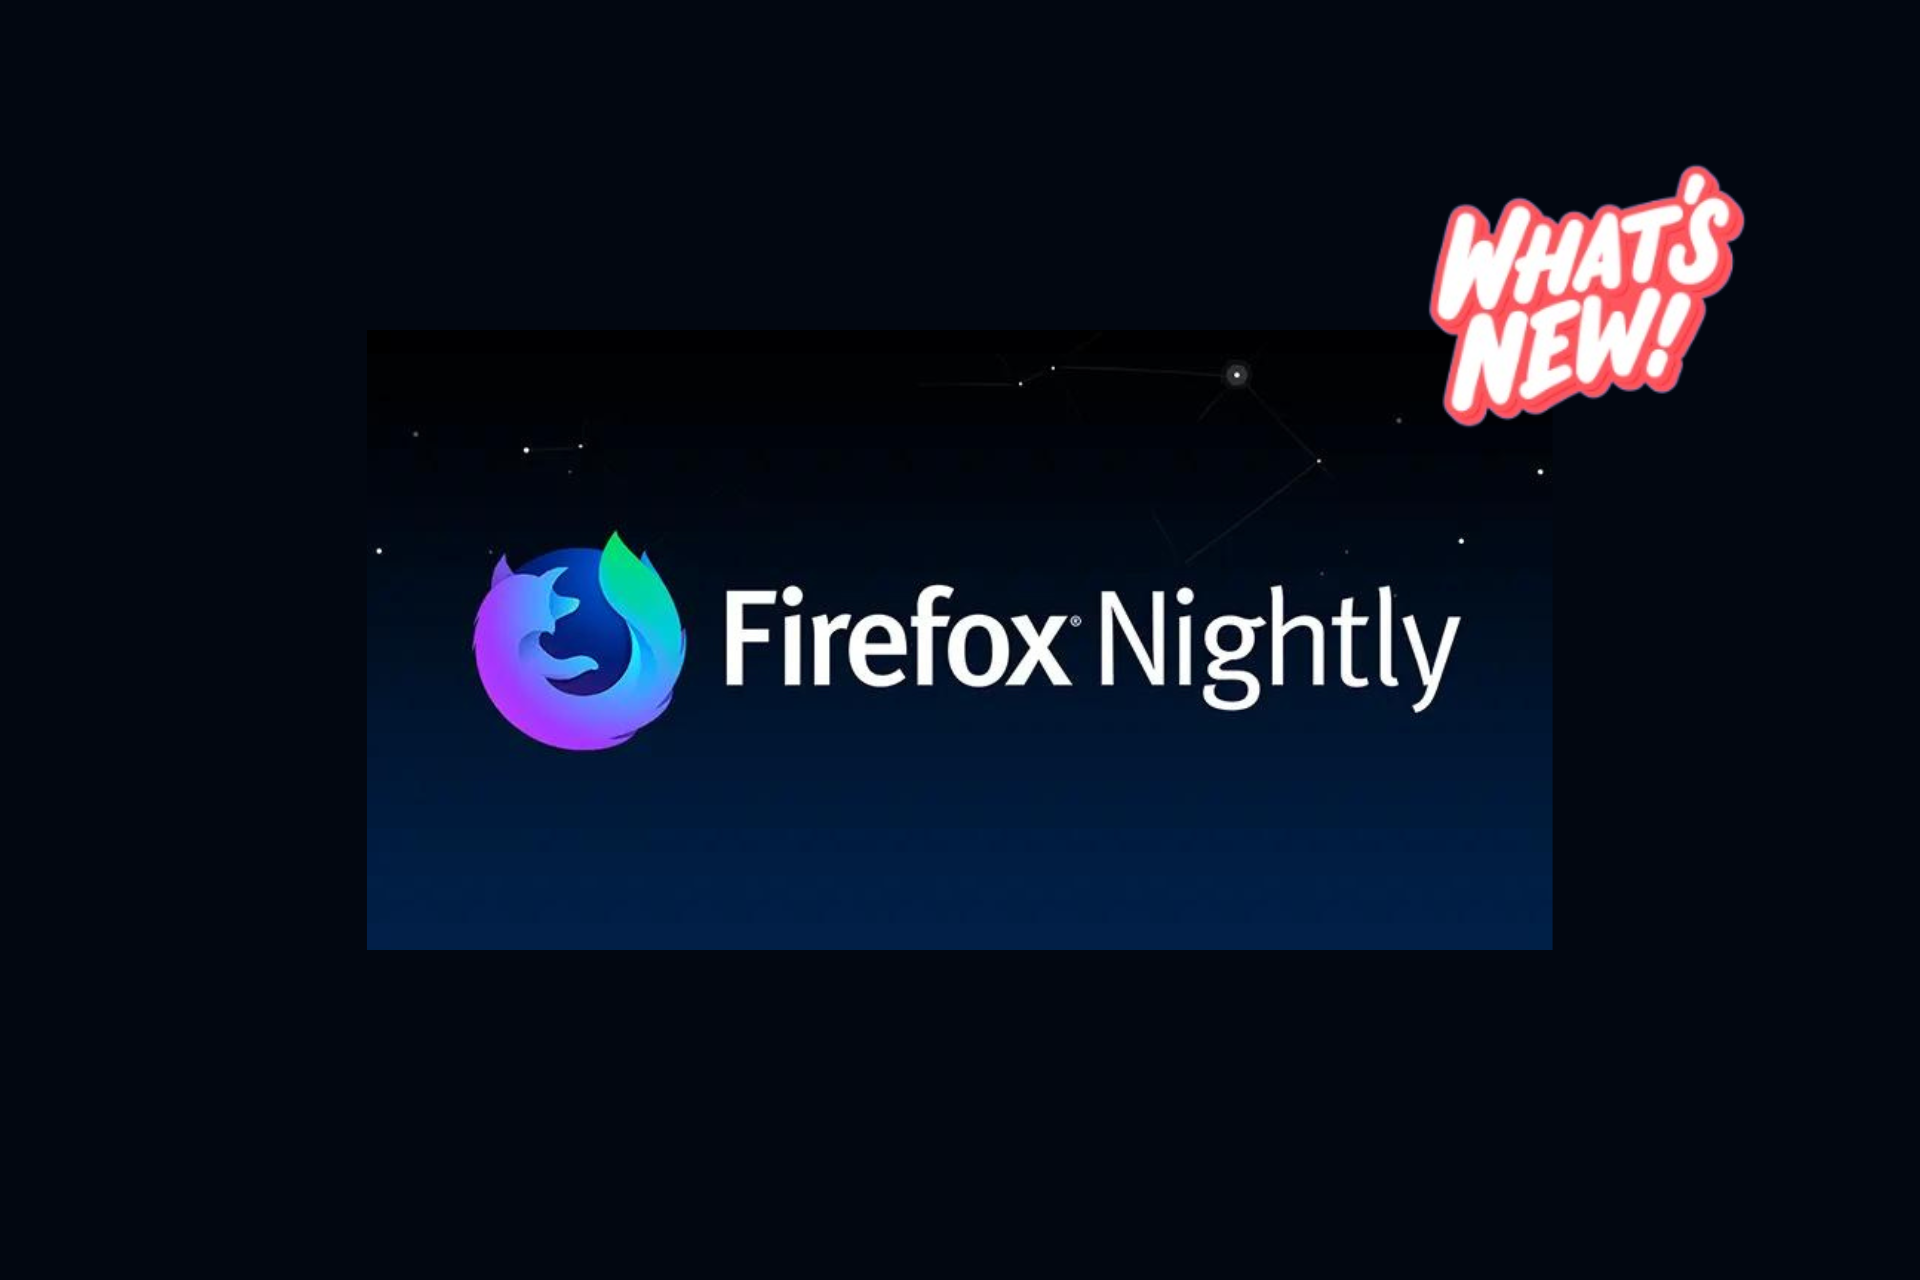 Firefox Nightly introduces Alt text generation for enhanced web accessibility